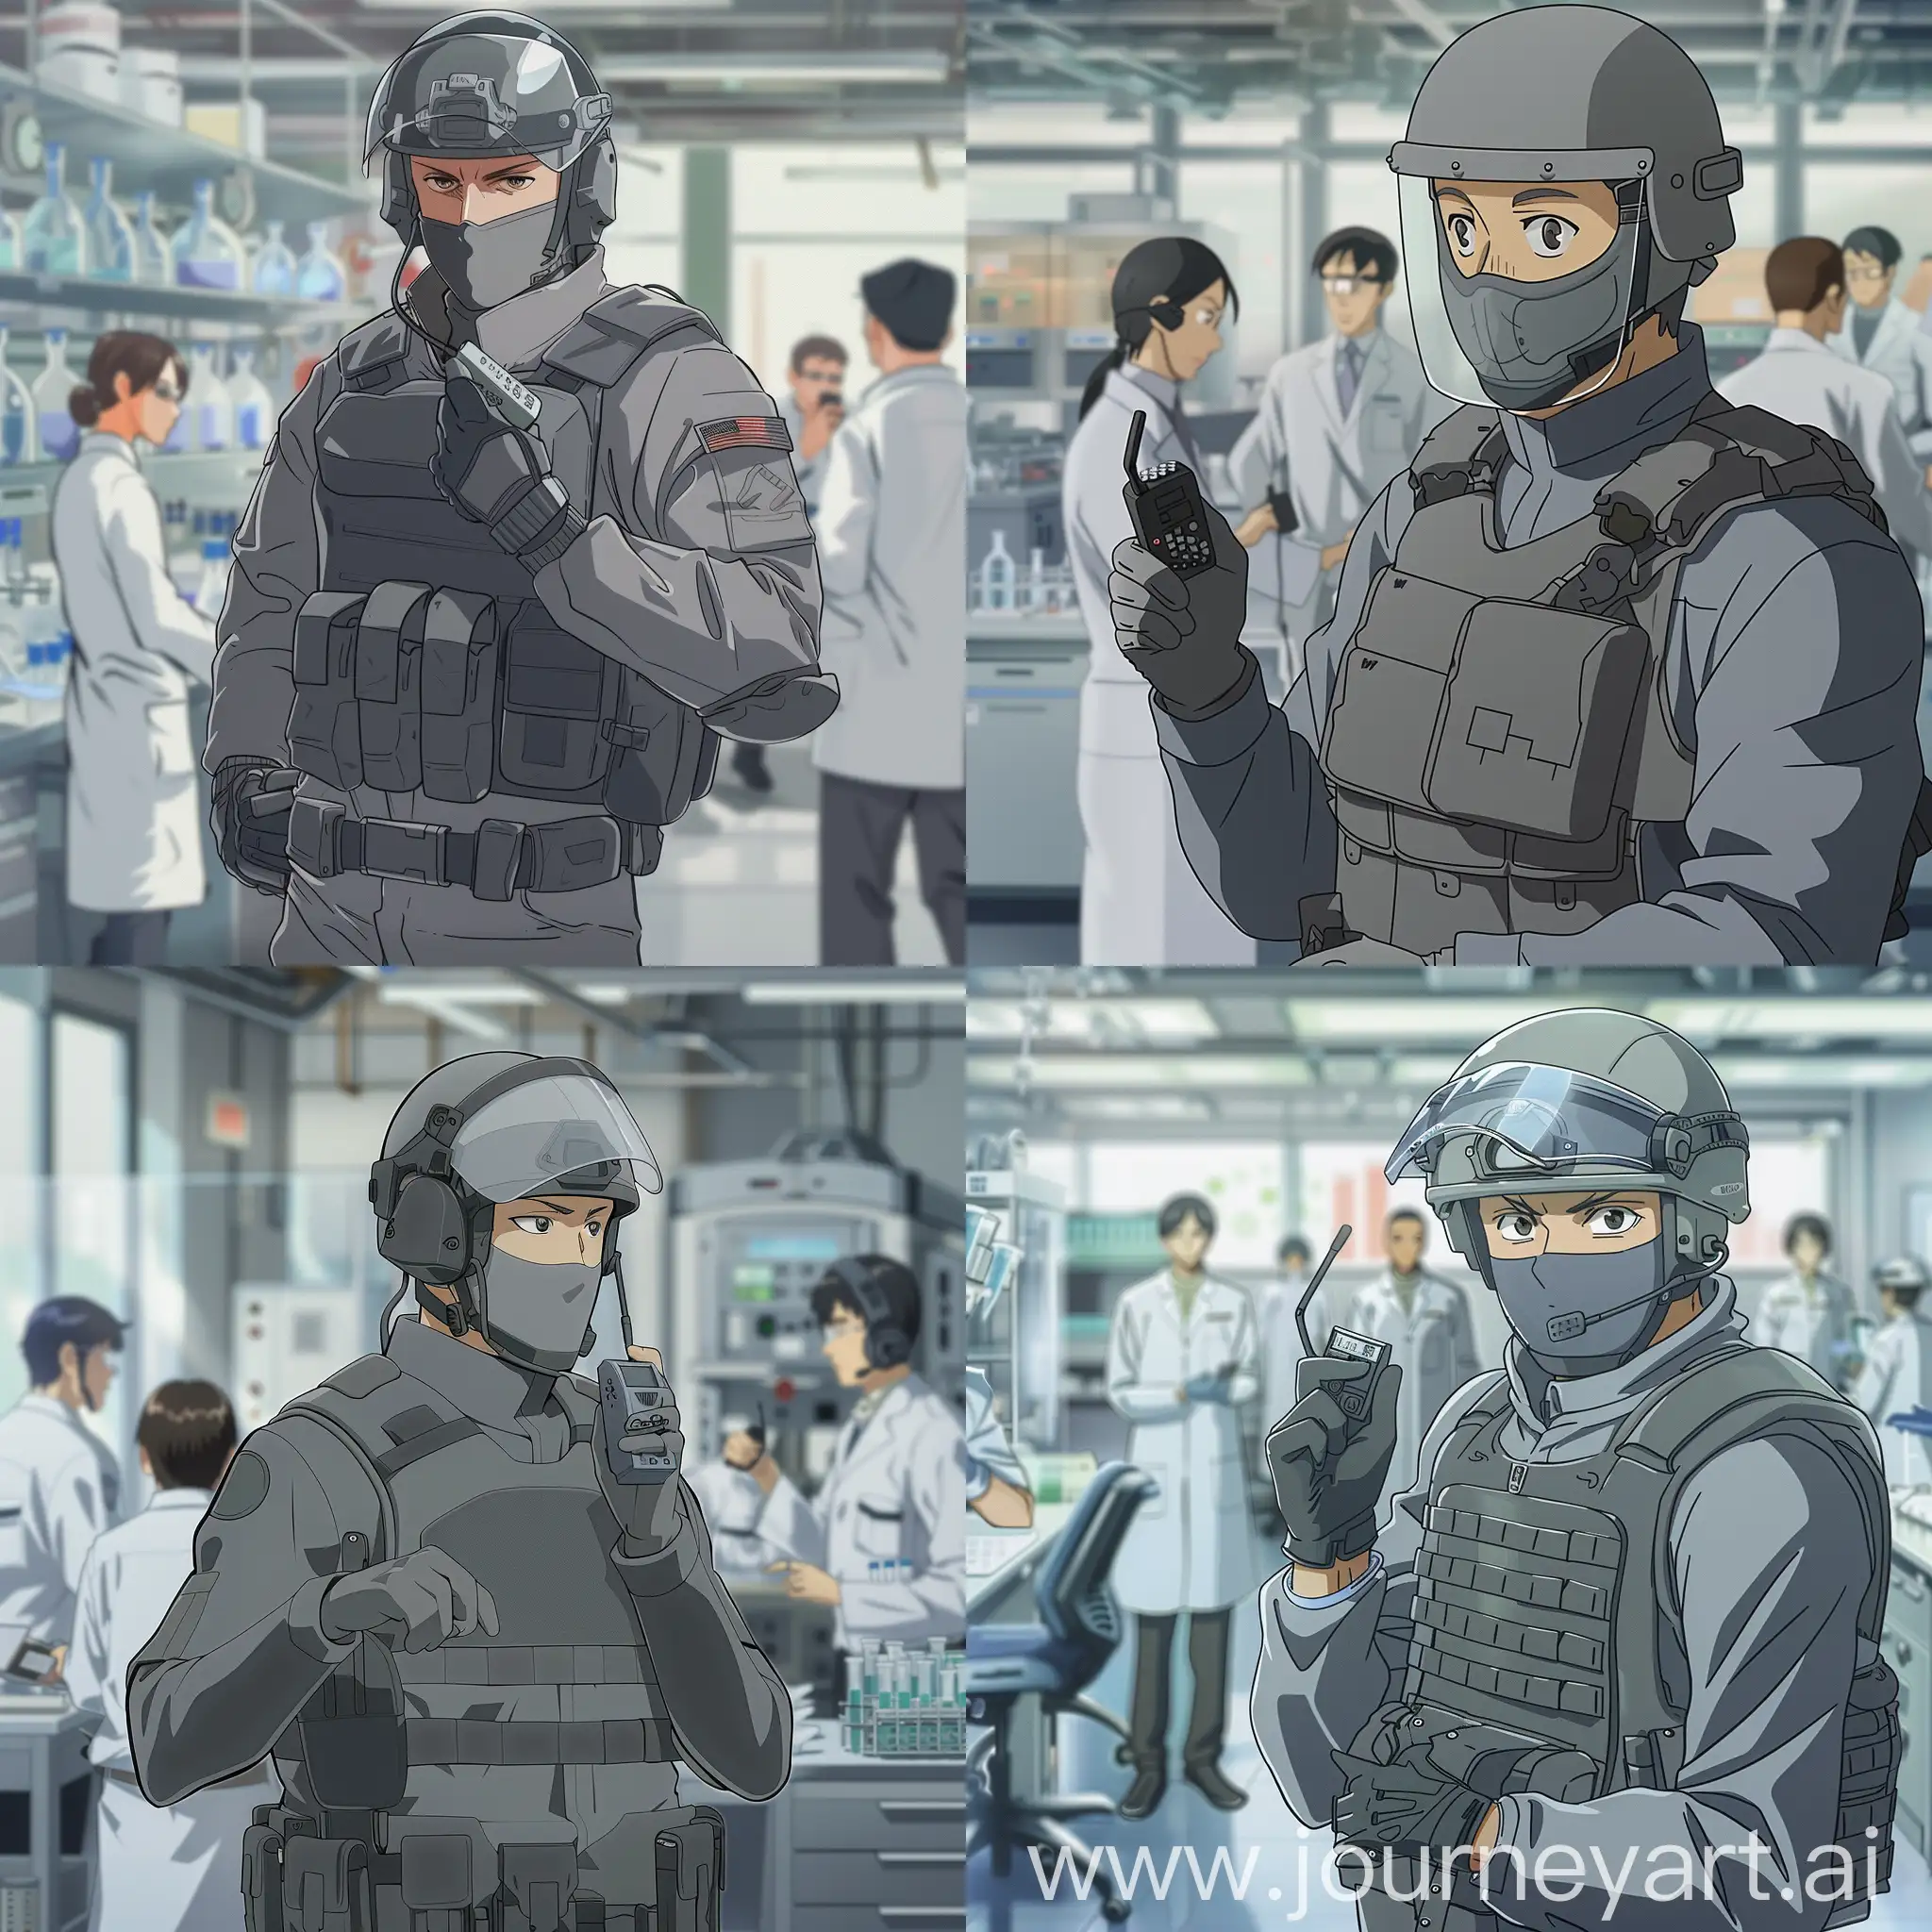 Security-Officer-in-Gray-Uniform-Reports-from-Research-Laboratory-with-Anime-Style